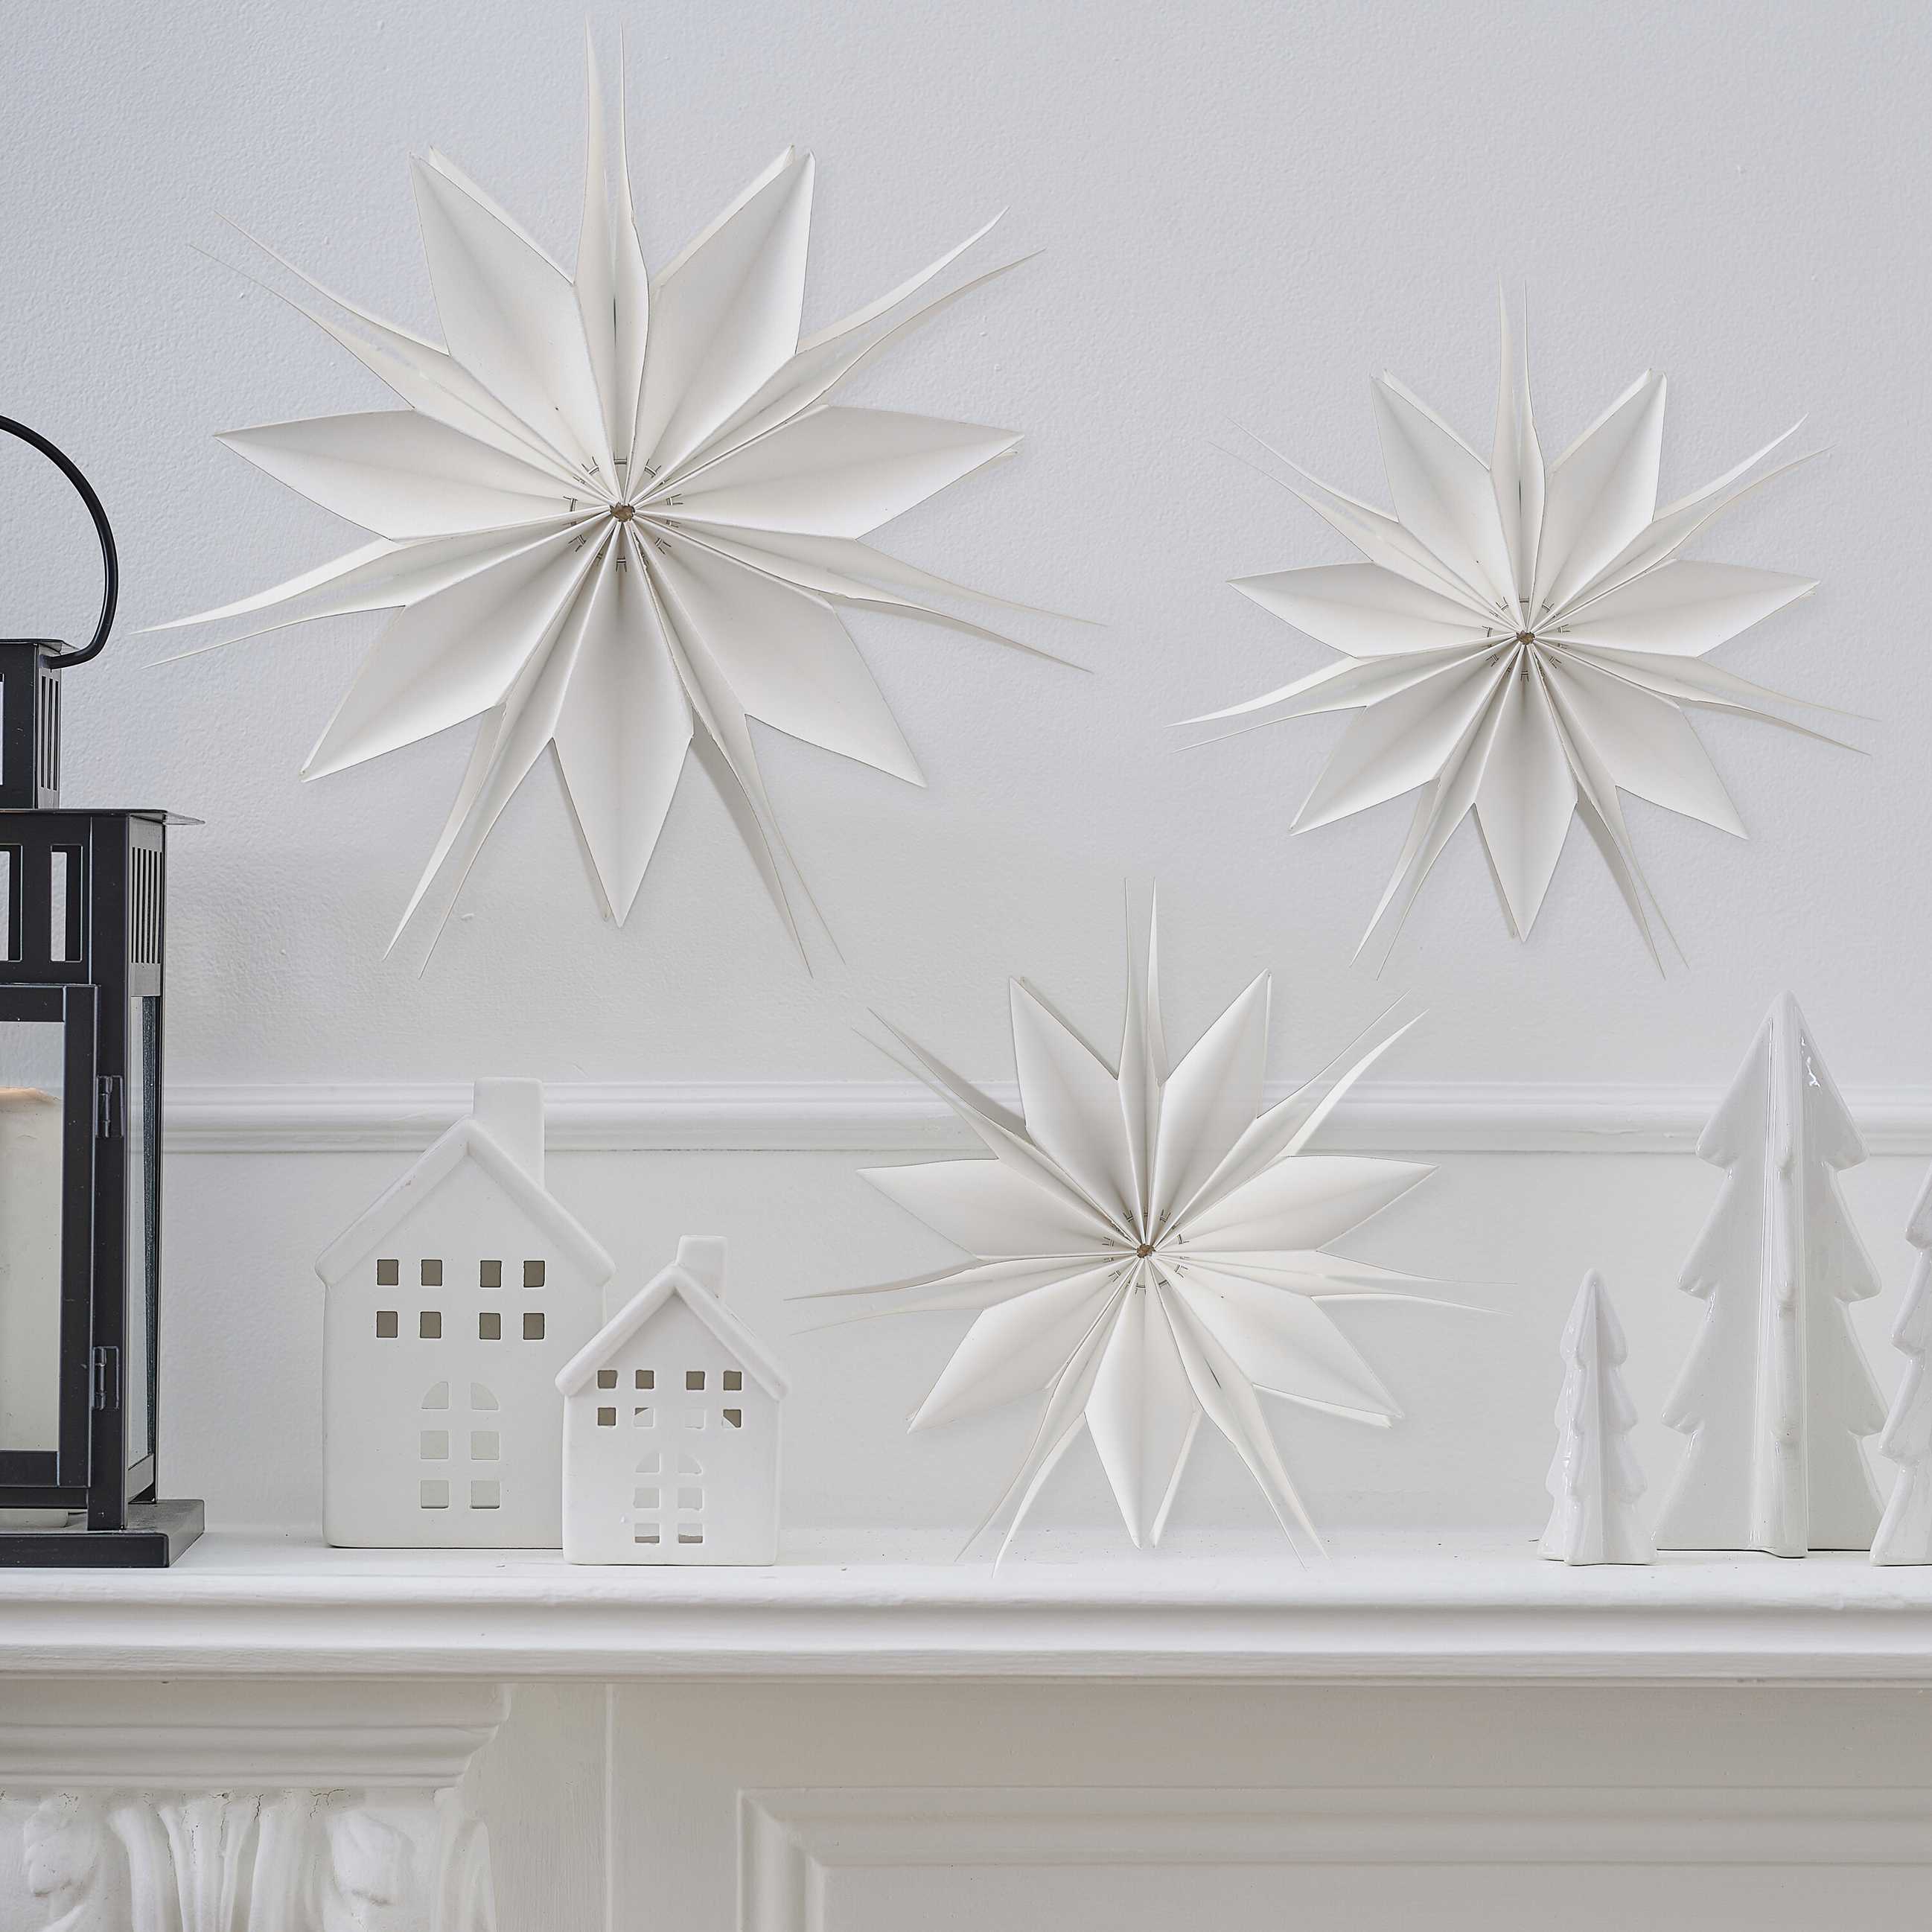 HANGING PAPER STAR DECORATIONS | SET OF 3